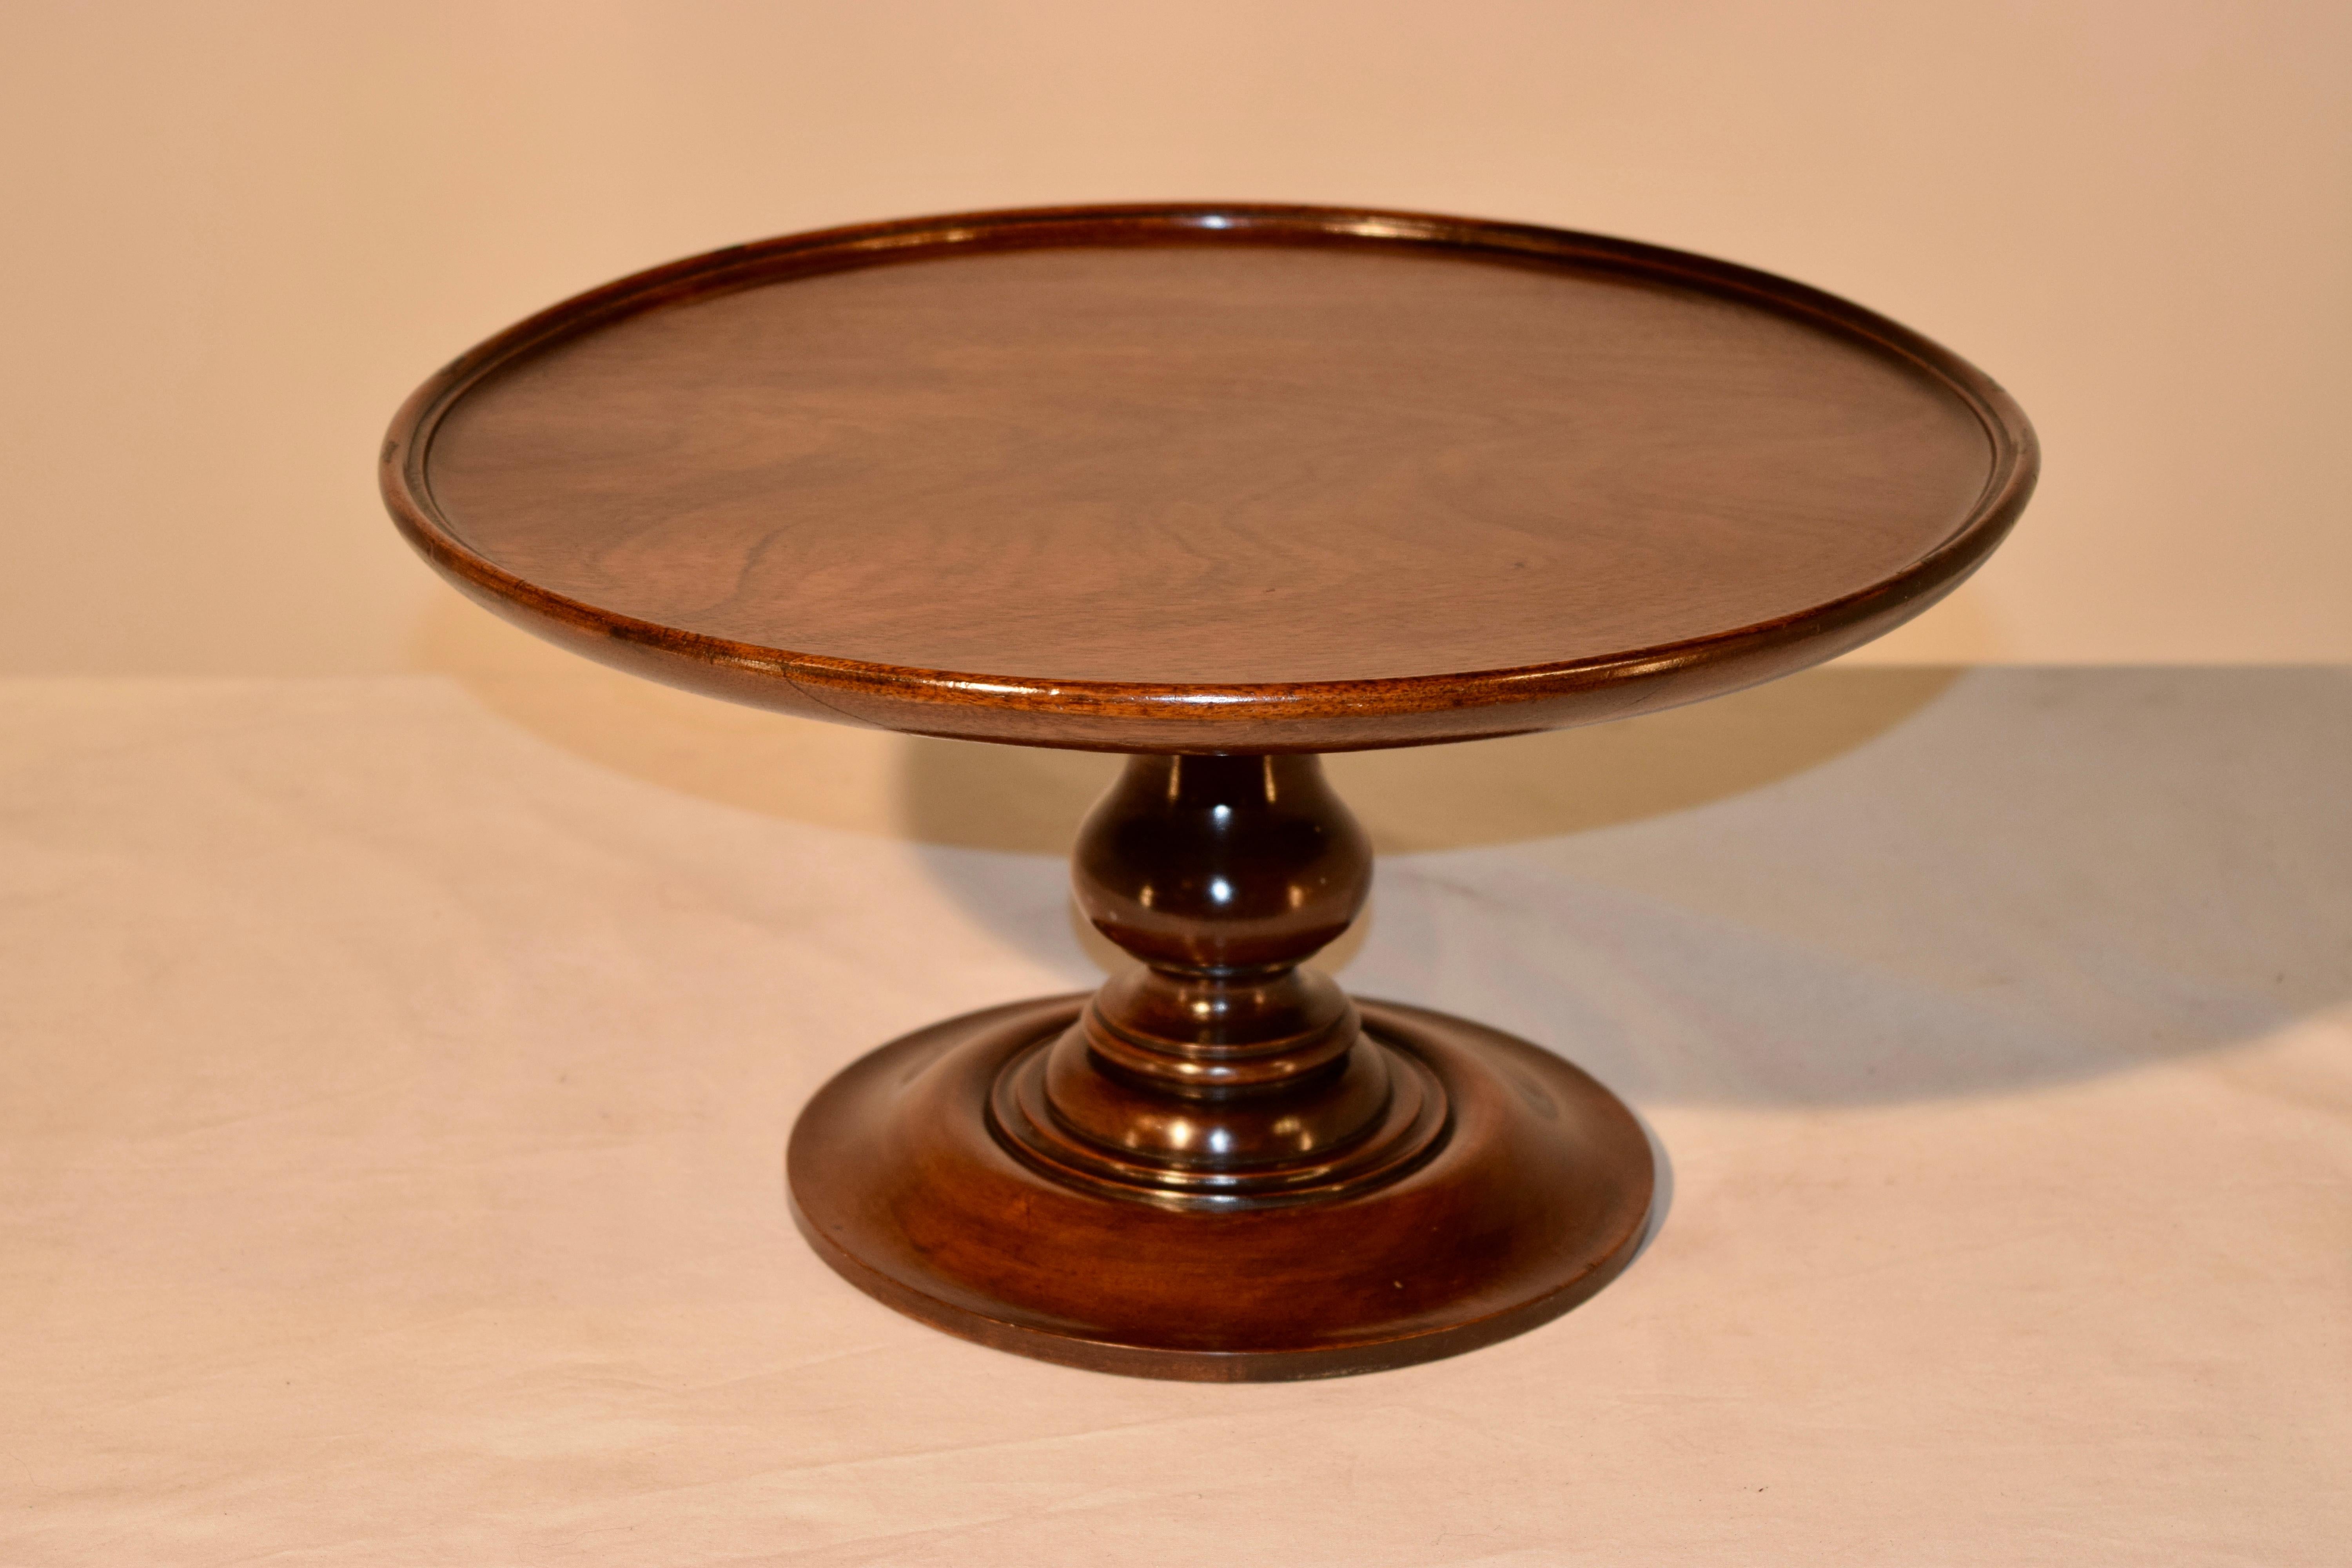 19th century English Lazy Susan made from mahogany with a dish shaped top supported on a nicely hand-turned pedestal base. The top has slight warping from age.